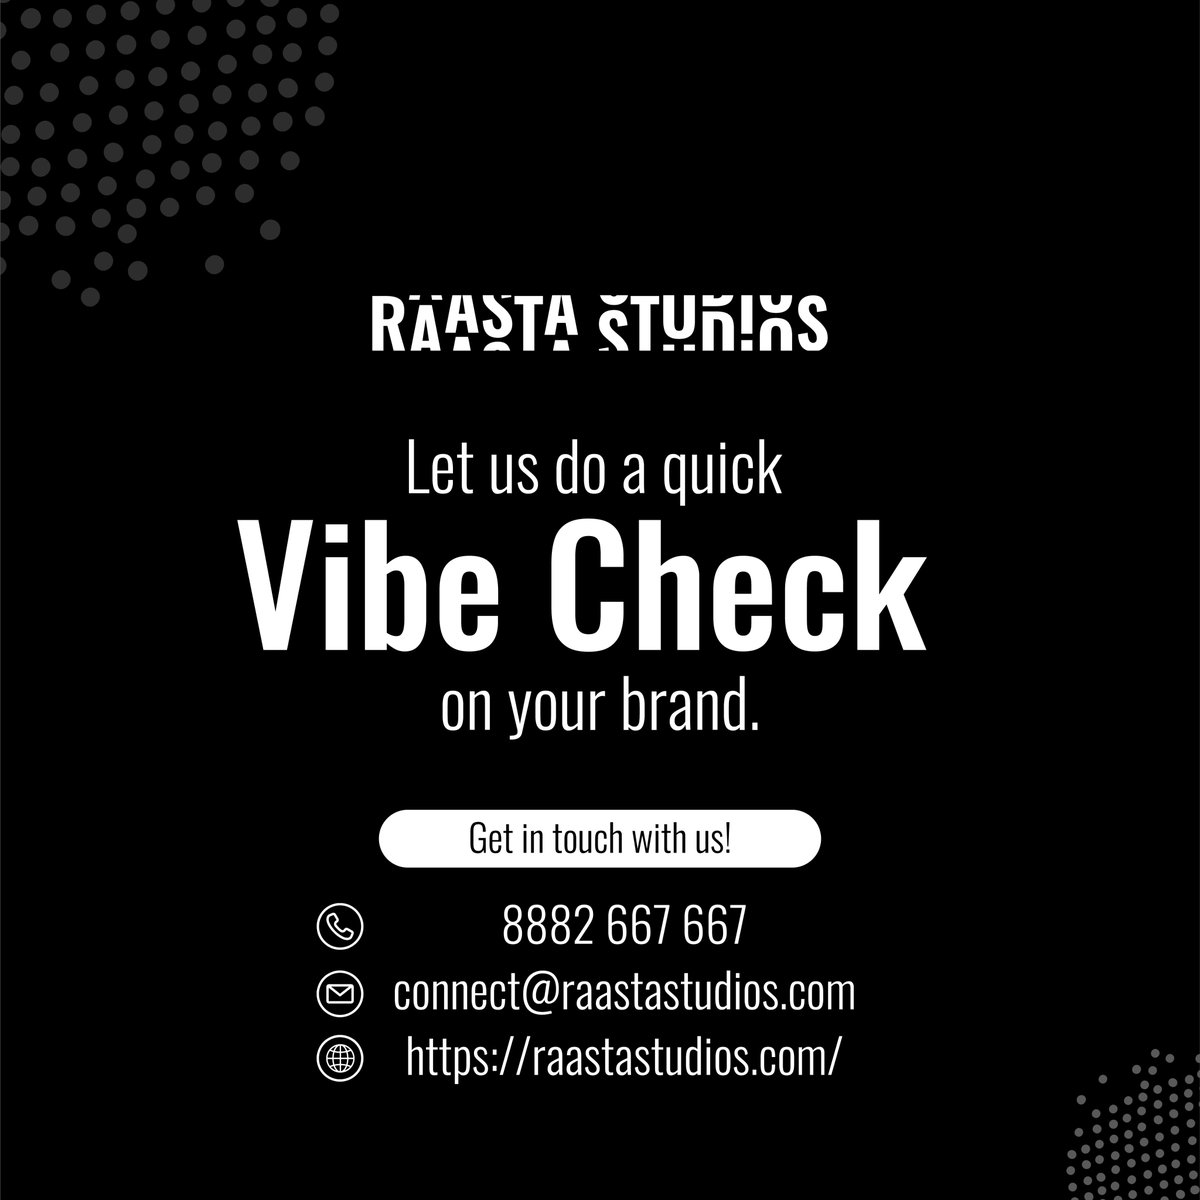 Slide into our DMs, or hit us up with a ring!

📞 Call: 8882 667 667⁠
📧 Email: connect@raastastudios.com⁠
🌐 Website: raastastudios.com⁠
⁠

#RaastaStudios #RaastaStudiosHyderabad #GenZ #VibeCheck #GlowUp #W #HitsDifferent #CreativeDirection #CreativeMinds